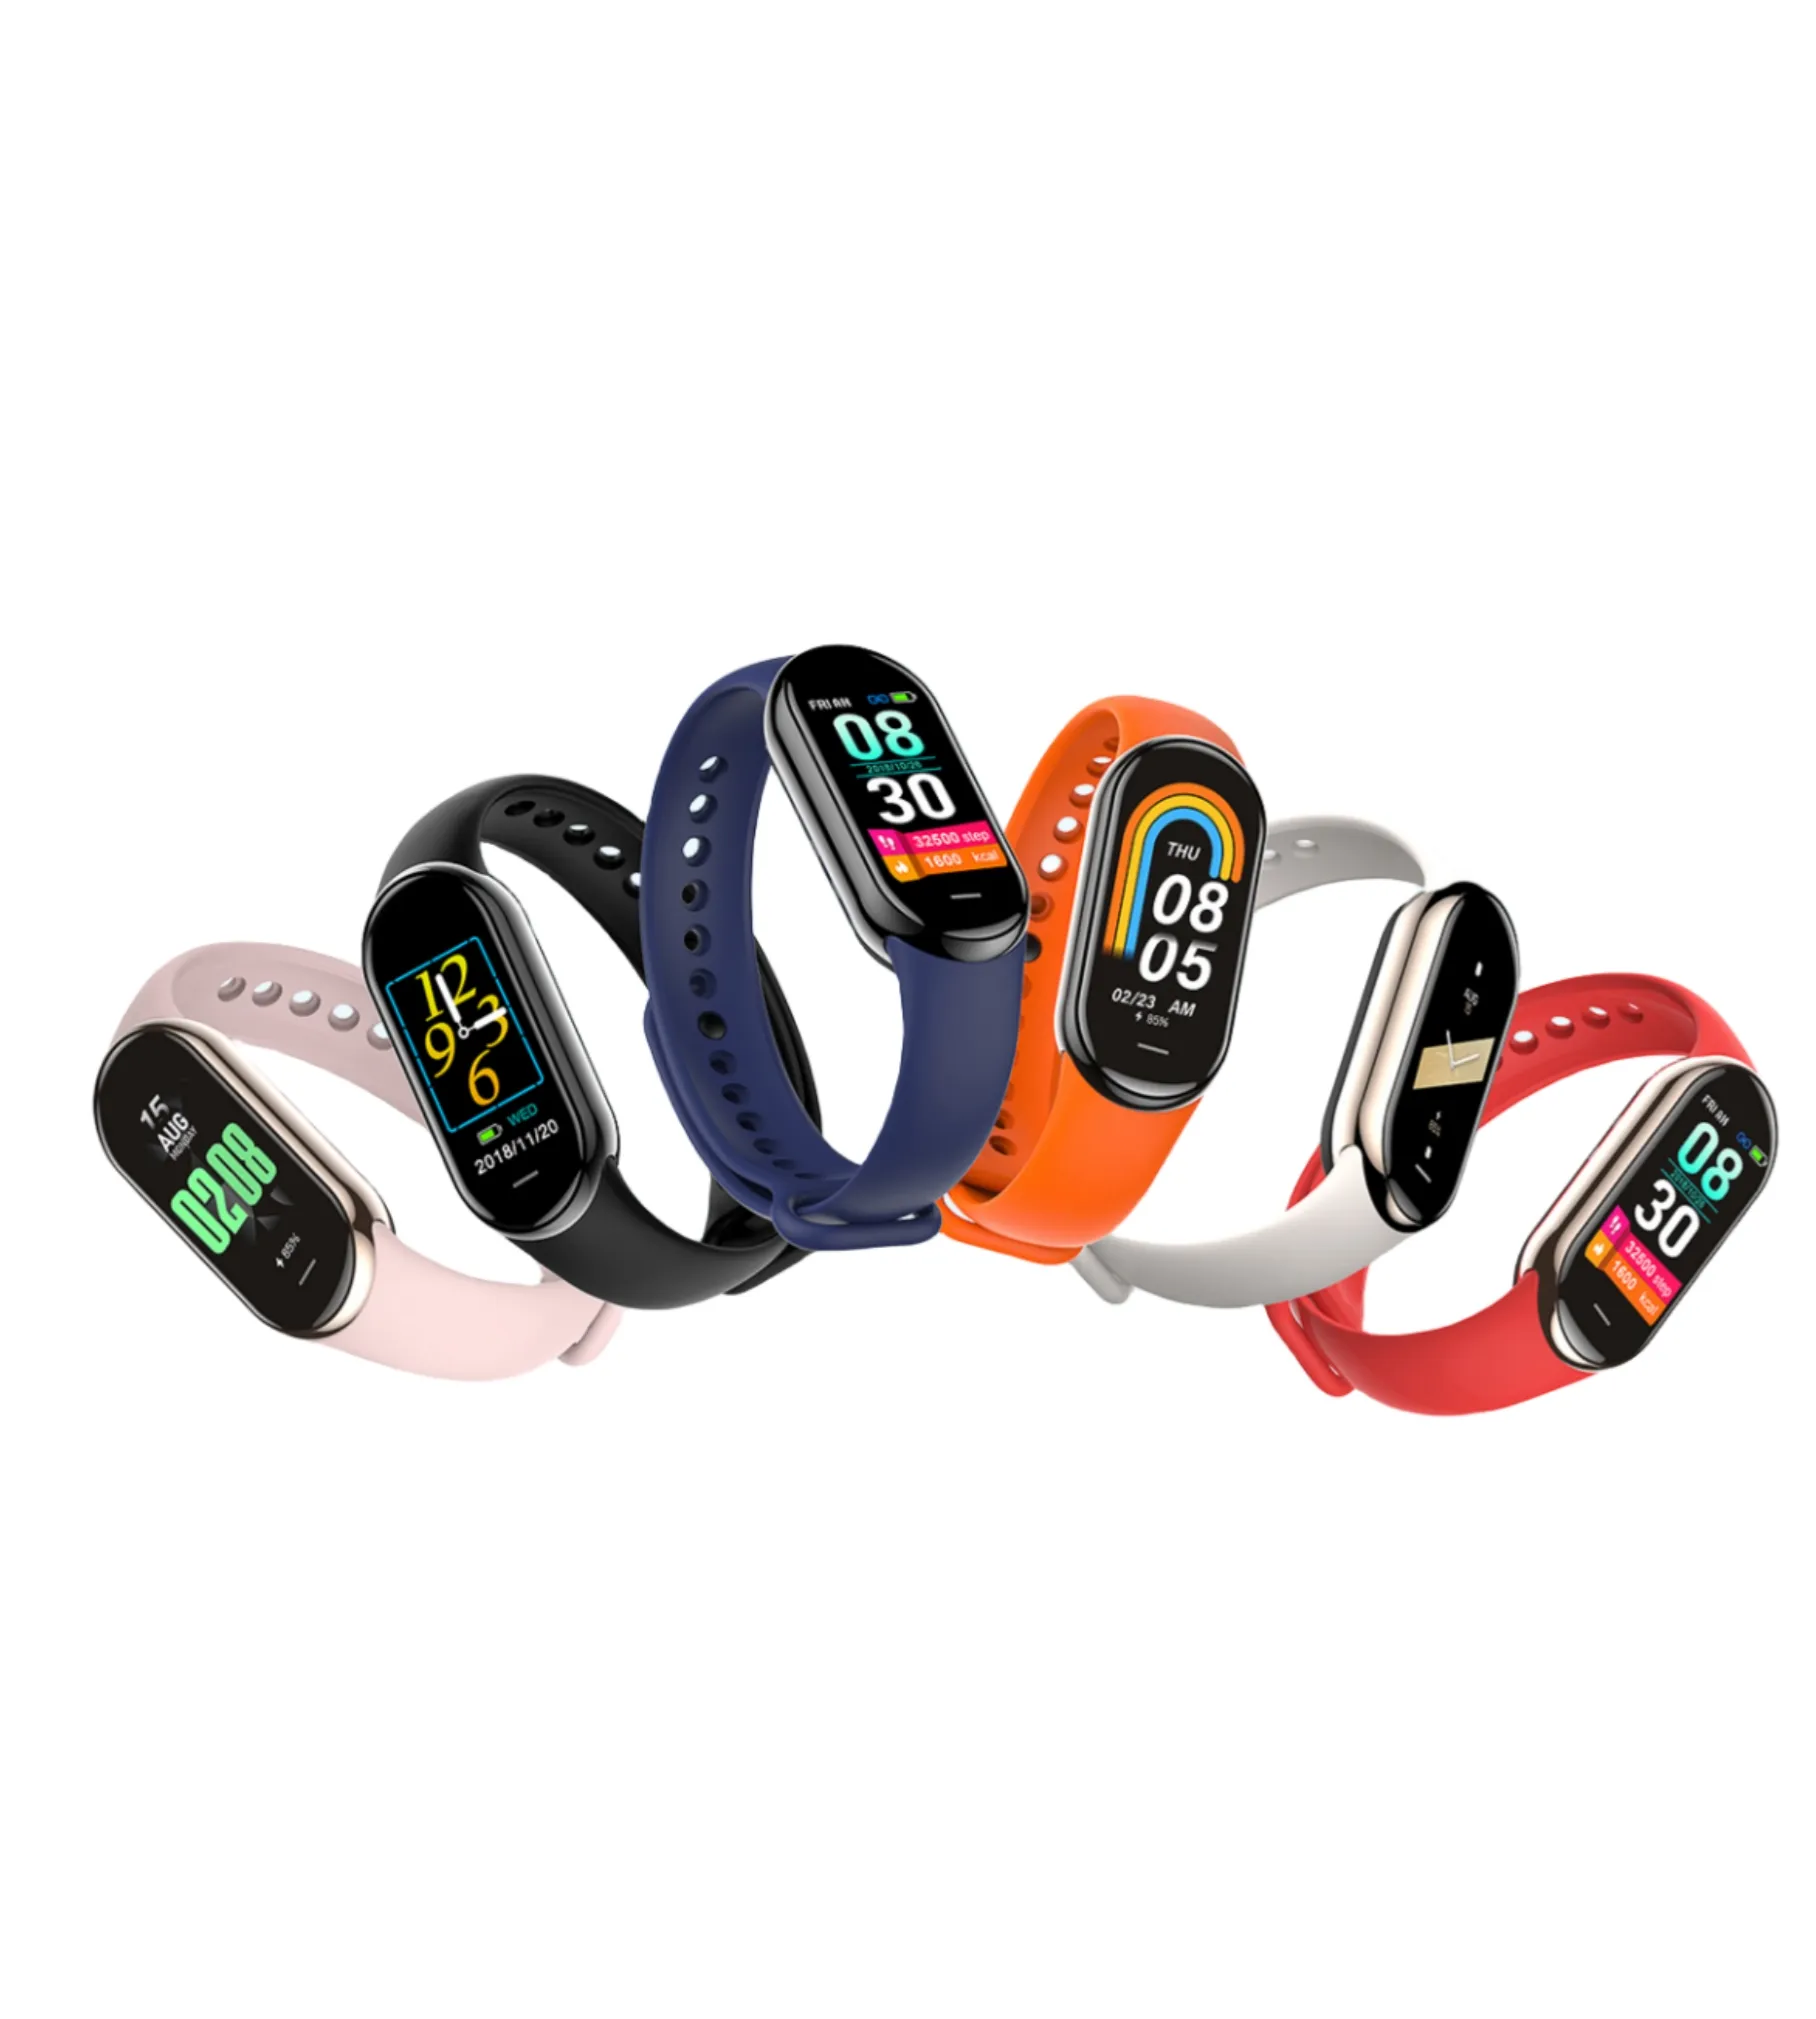 The M8 Smart wristband features a 1.14-inch HD screen with easy-to-replace strap, heart rate and waterproof motion